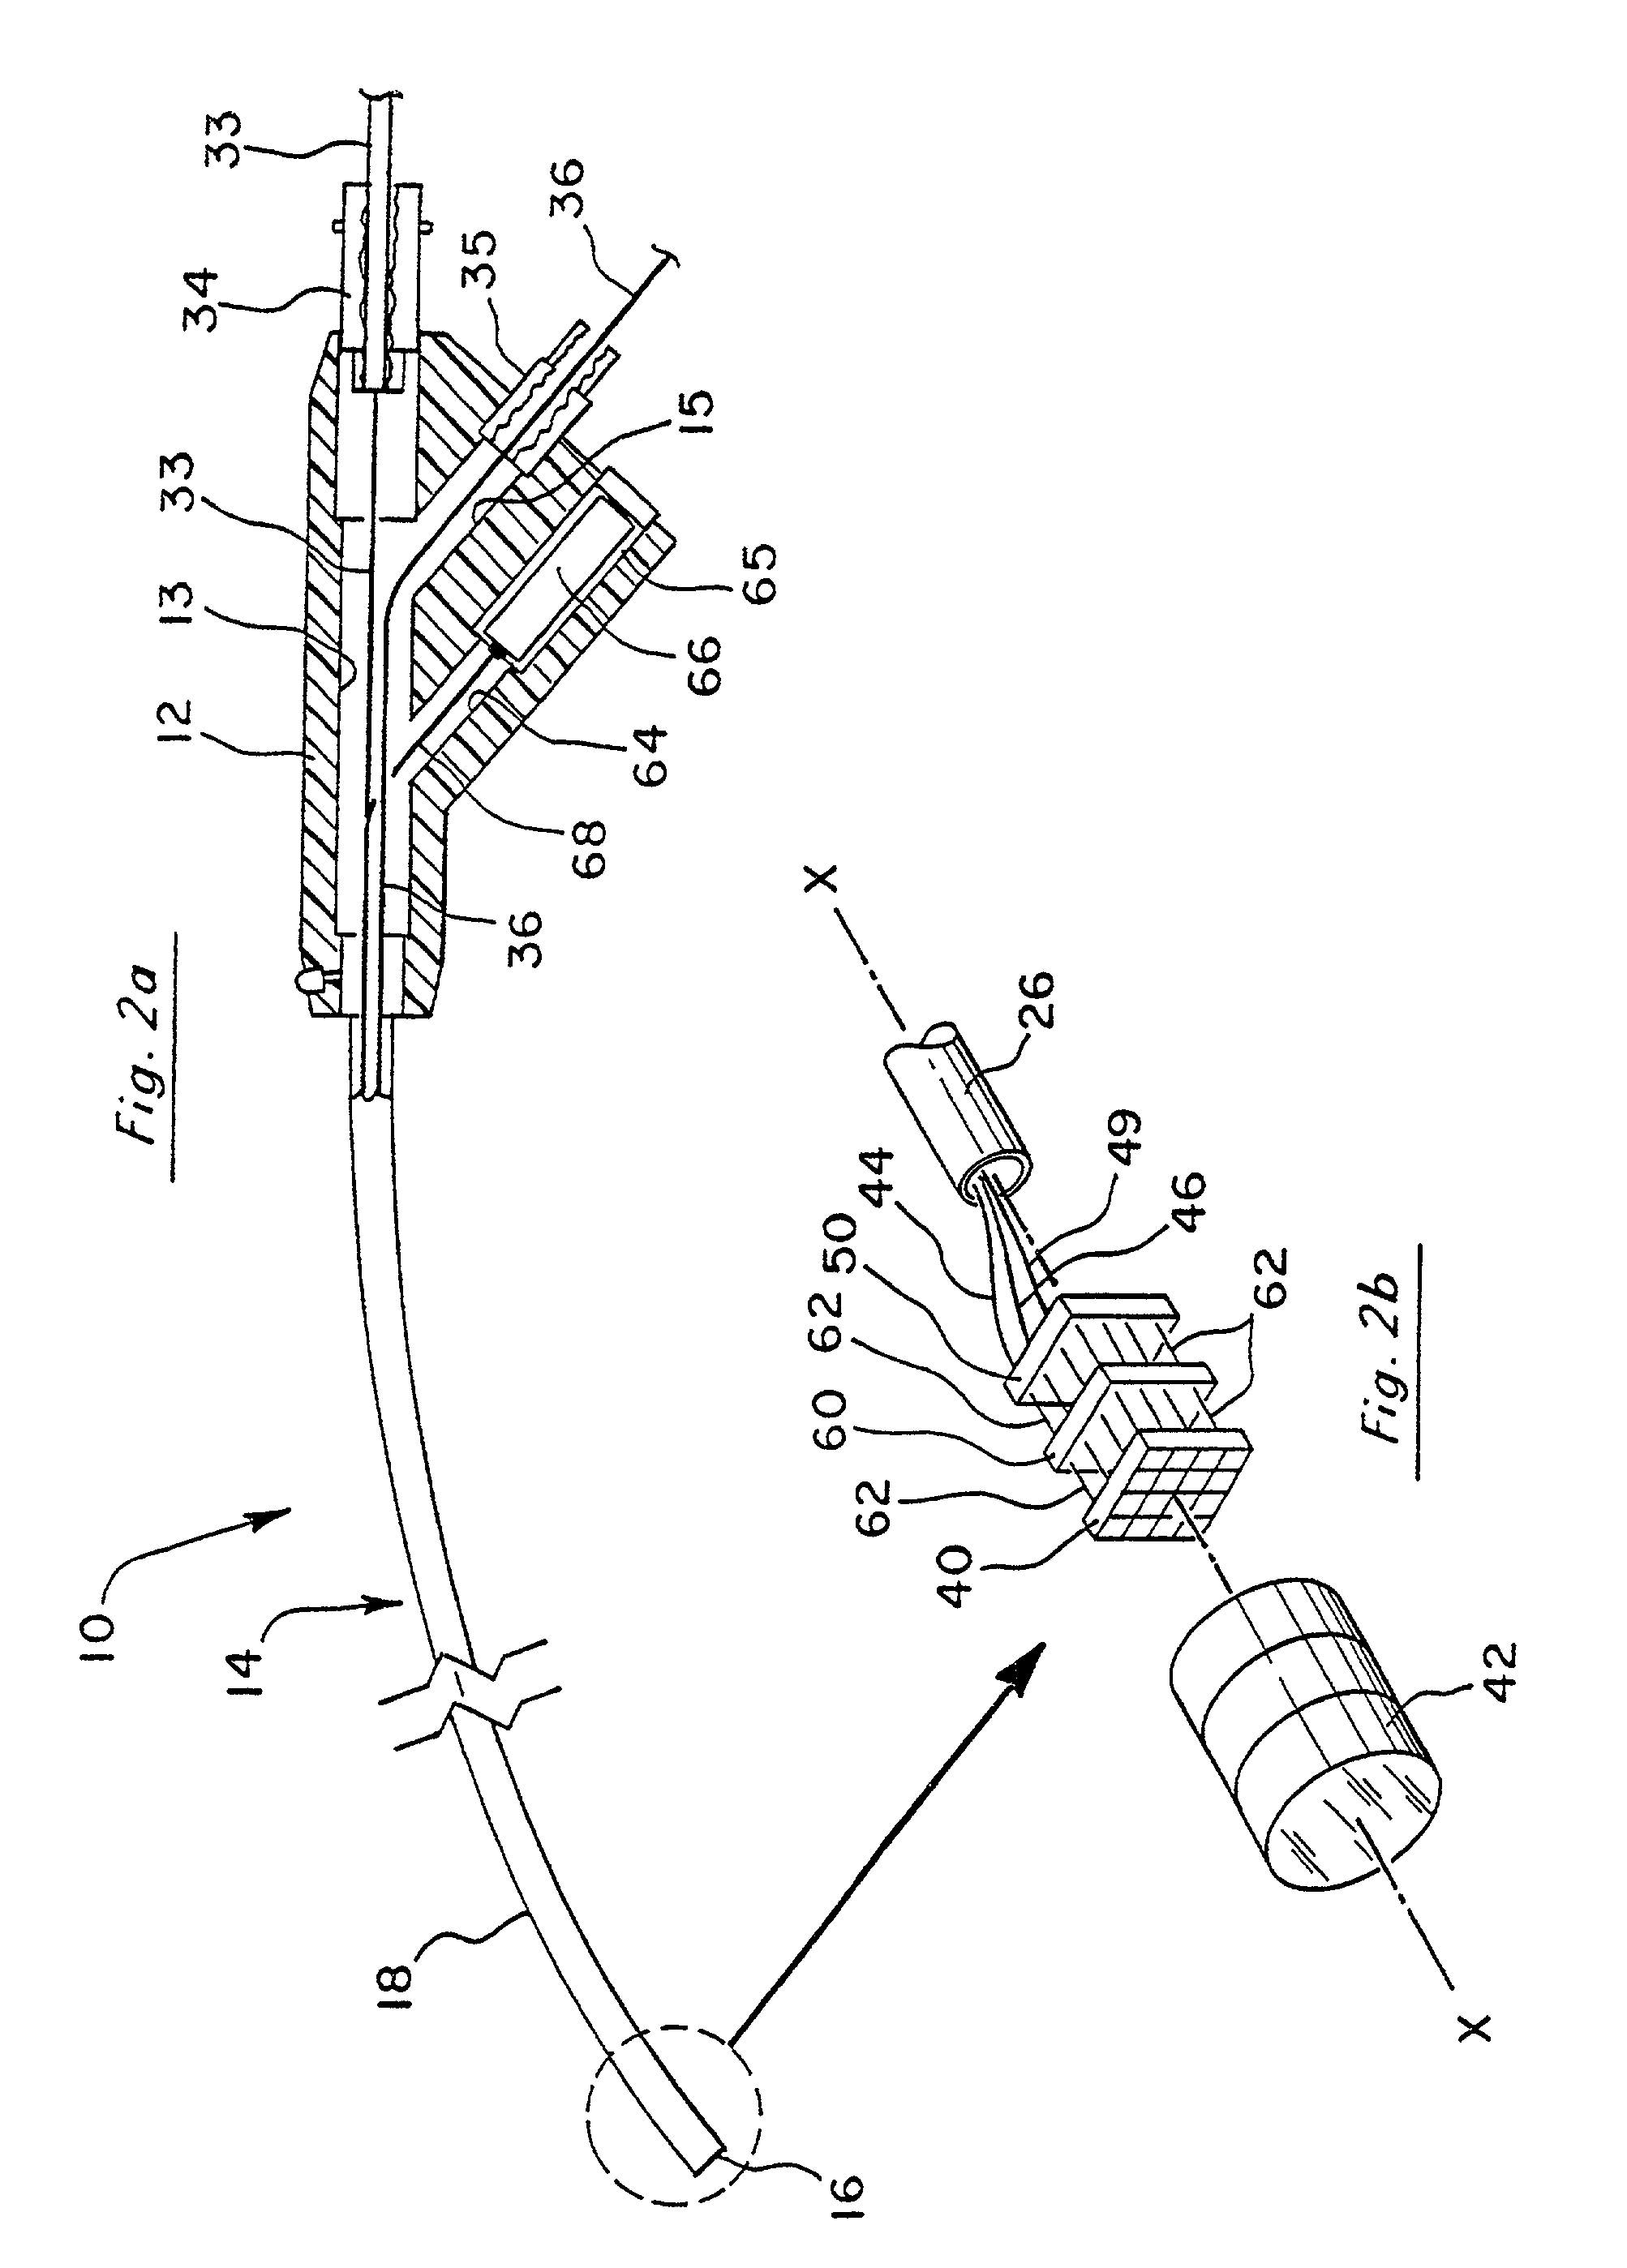 Reduced area imaging devices utilizing selected charge integration periods